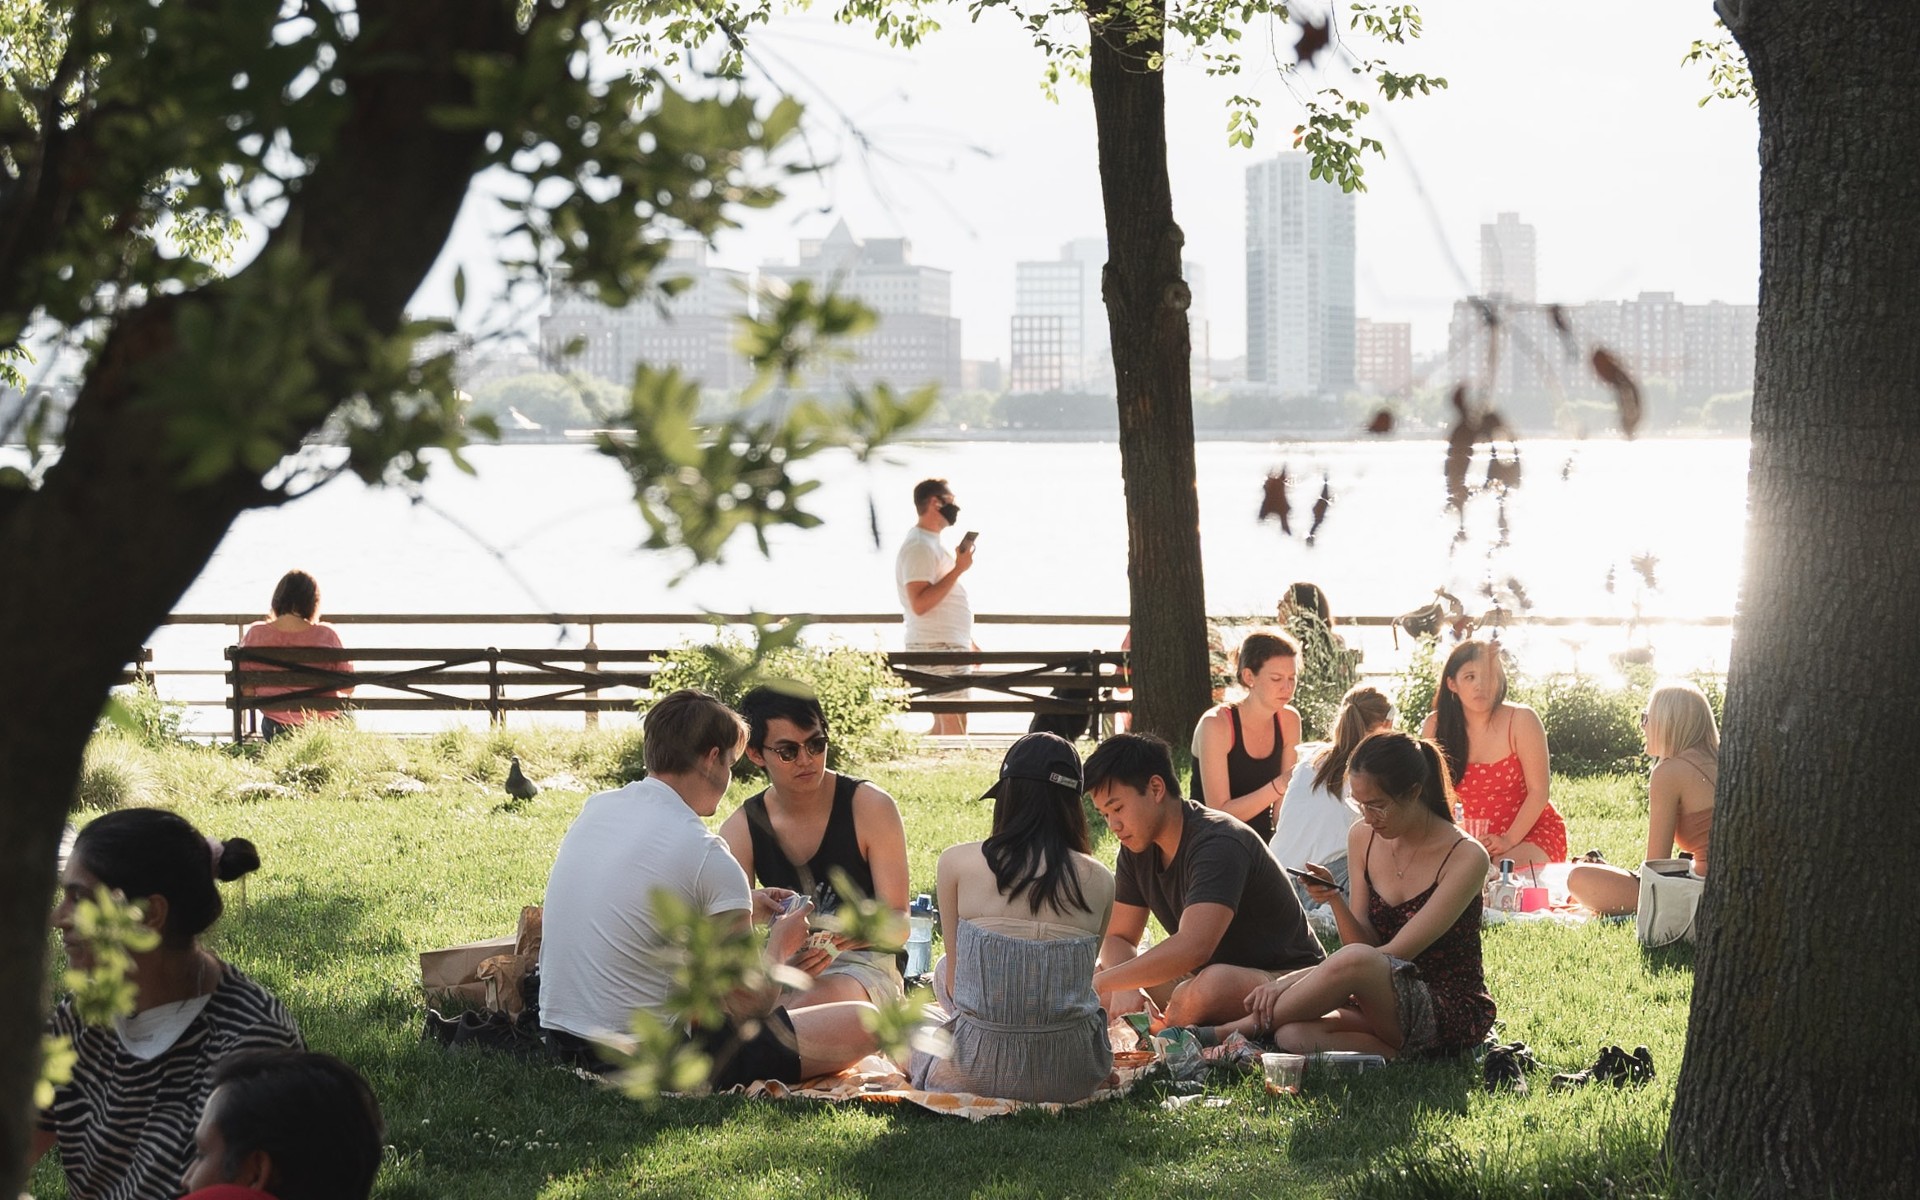 A group of people sitting together on a lawn by the Hudson River